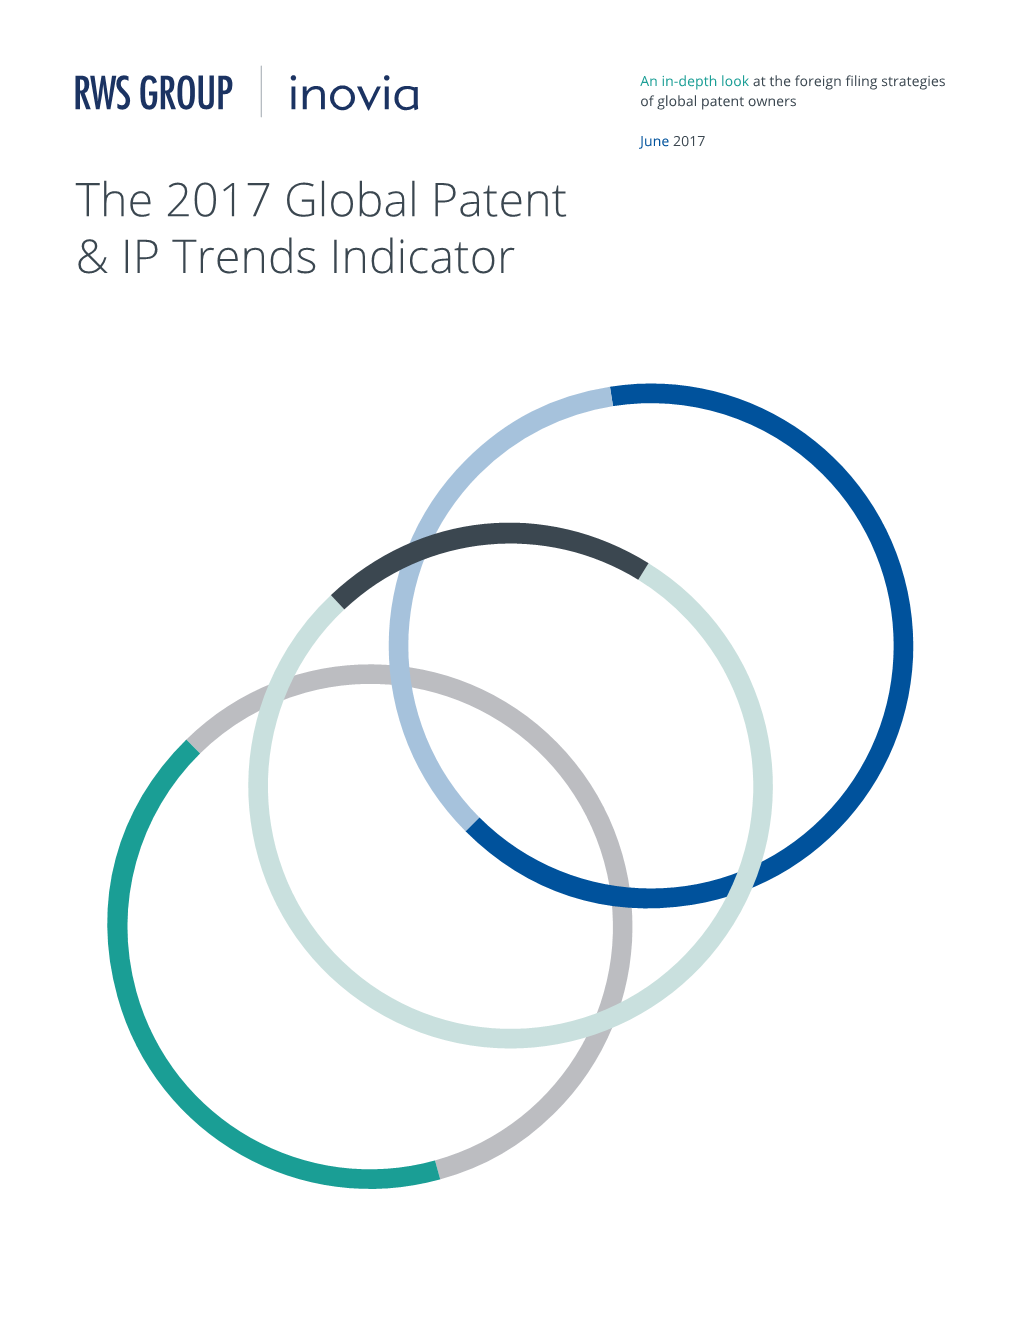 The 2017 Global Patent & IP Trends Indicator